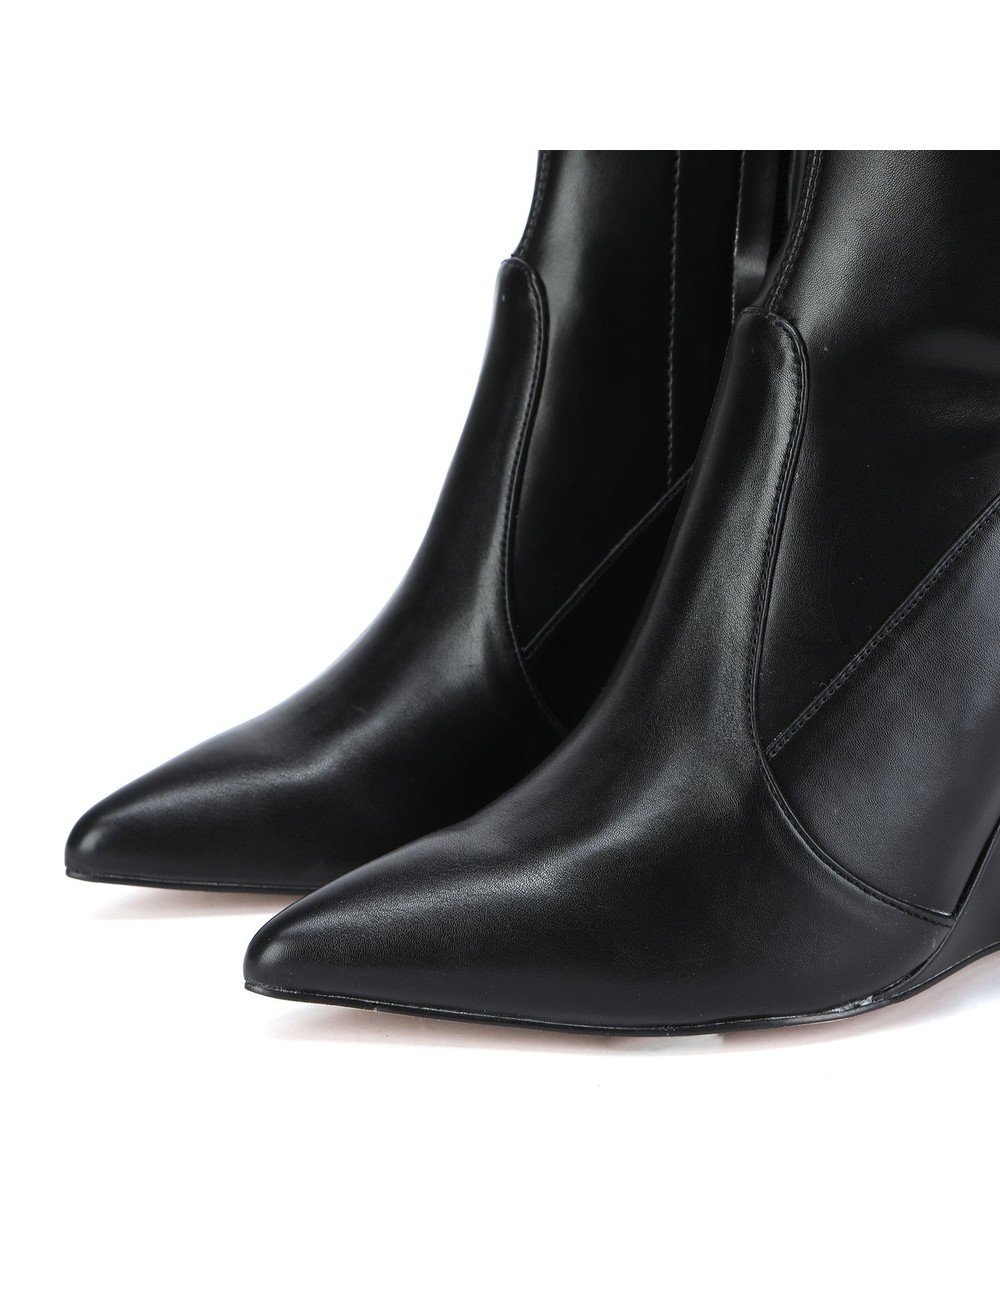 Giaro Giaro thigh boots with wedge heel EVERSON in black matte